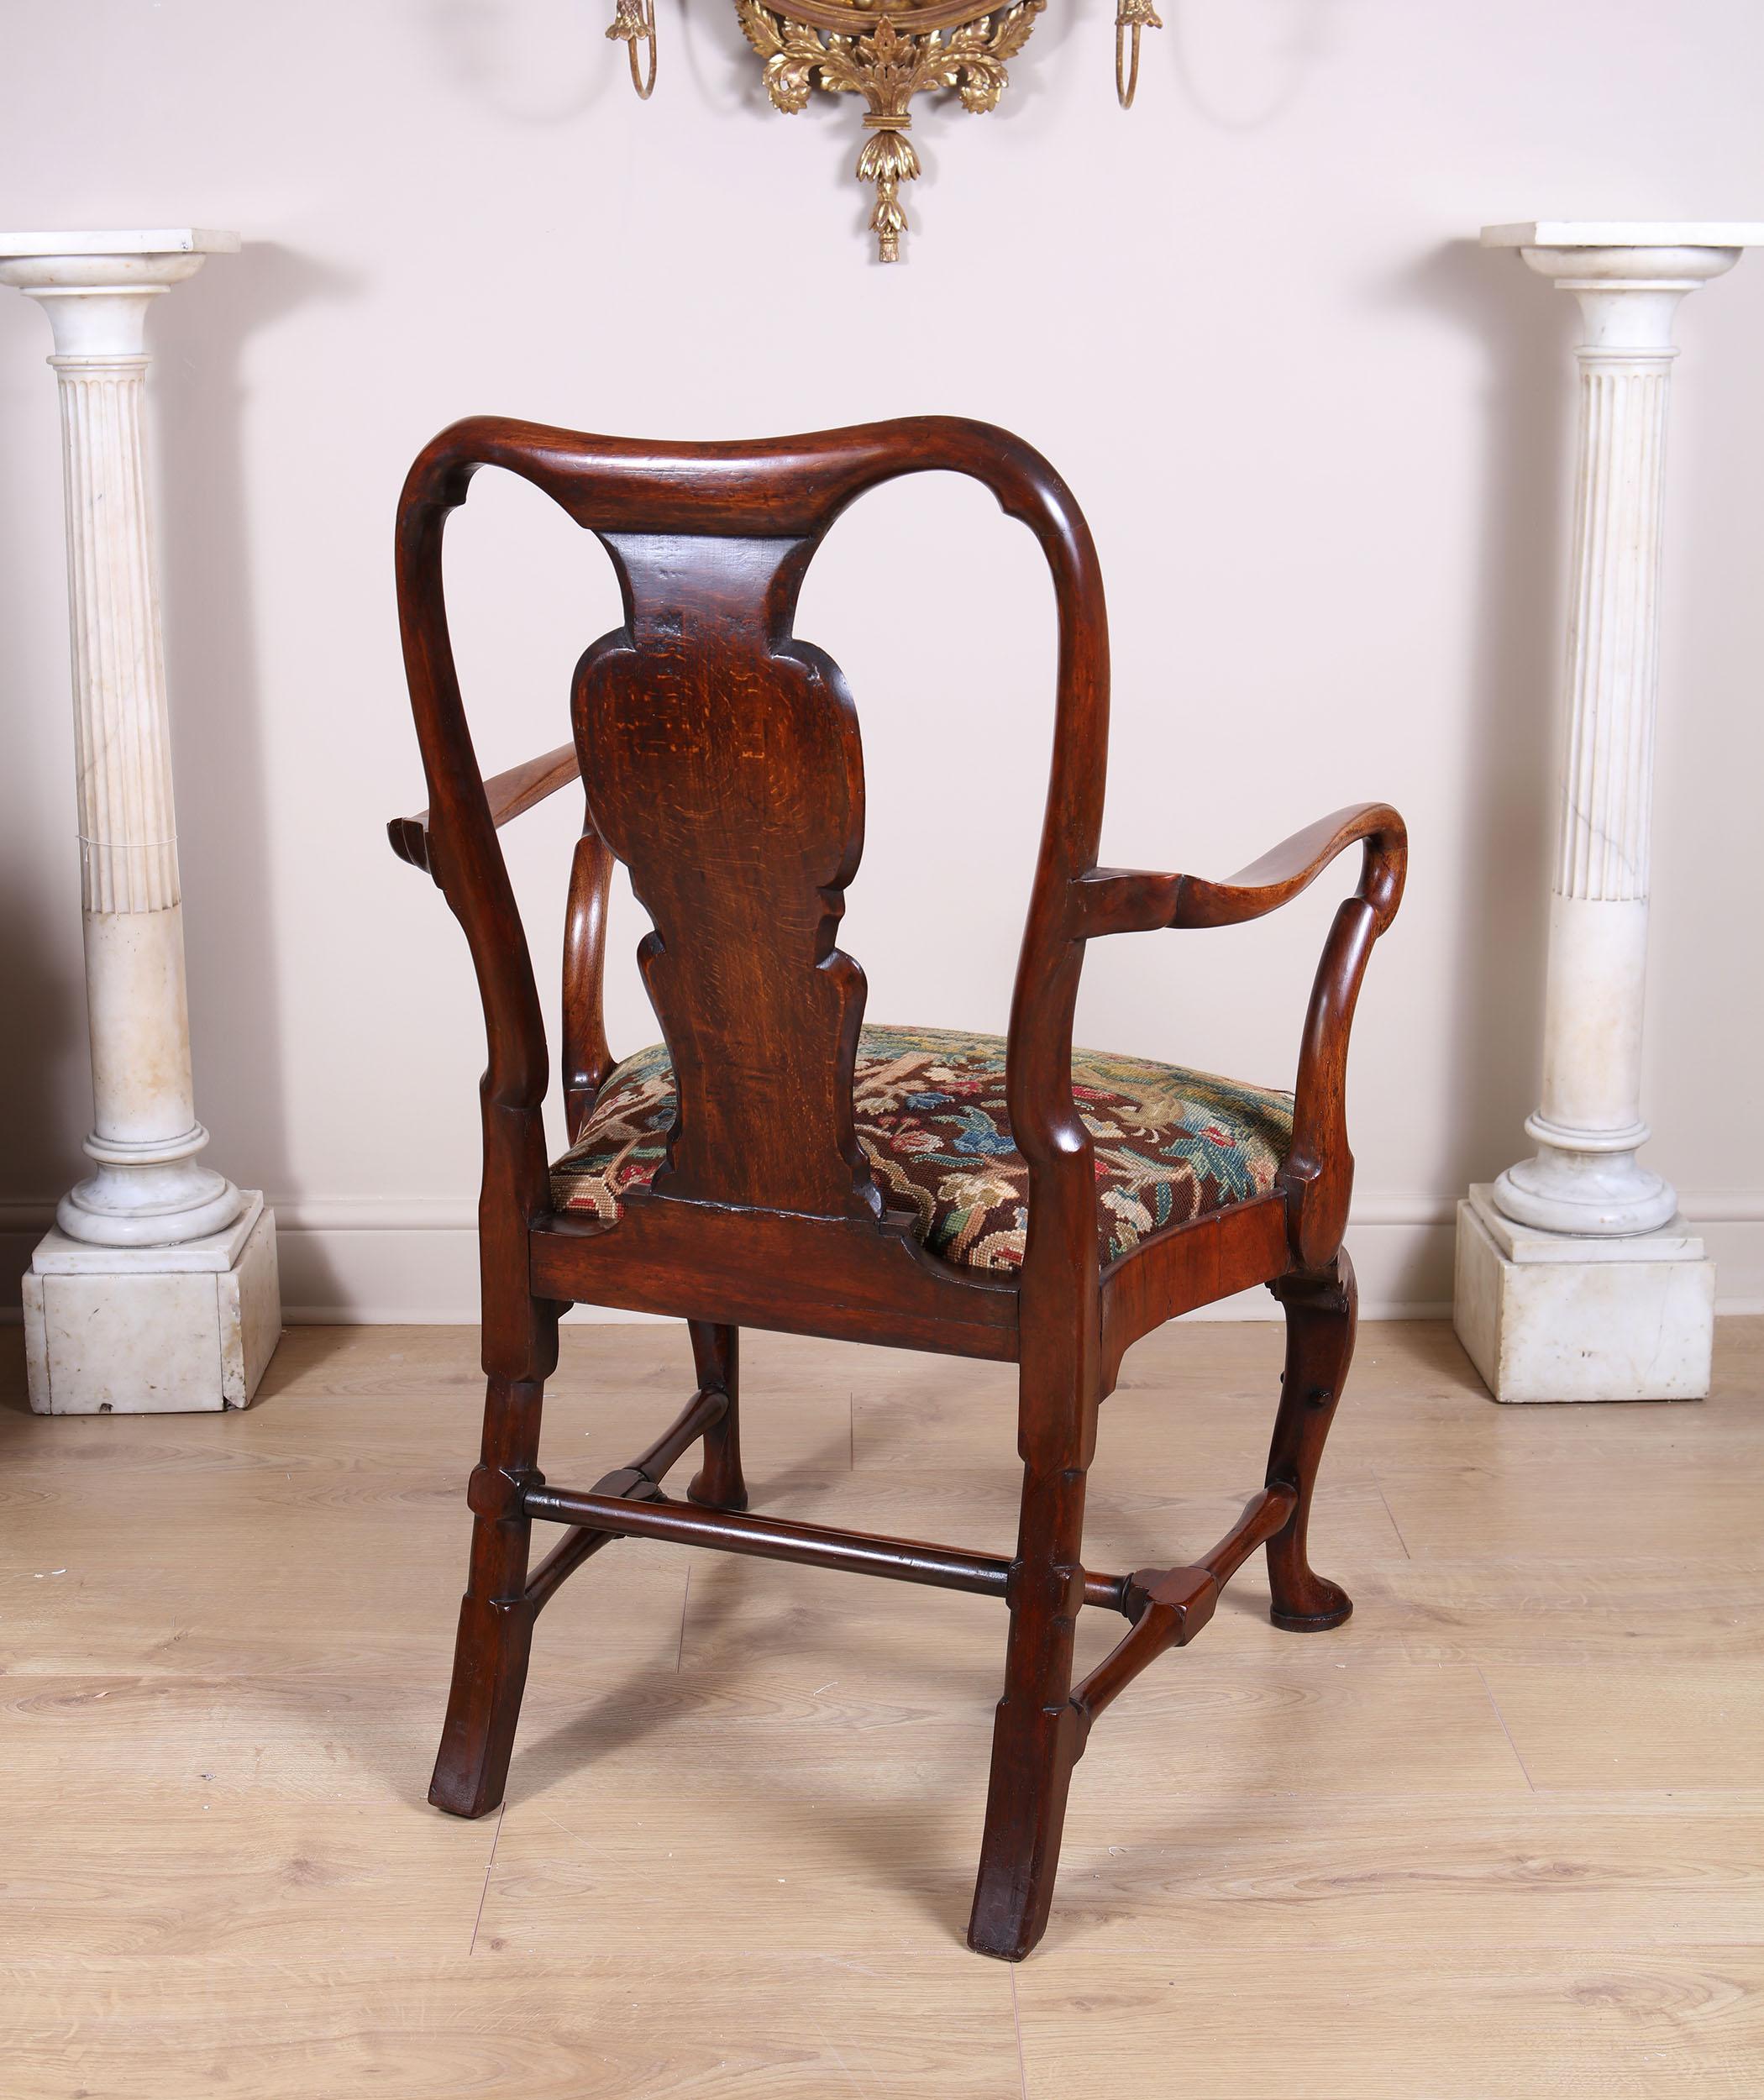 Fine Early 18th-Century Walnut Shepherd’s Crook Armchair In Good Condition In London, by appointment only